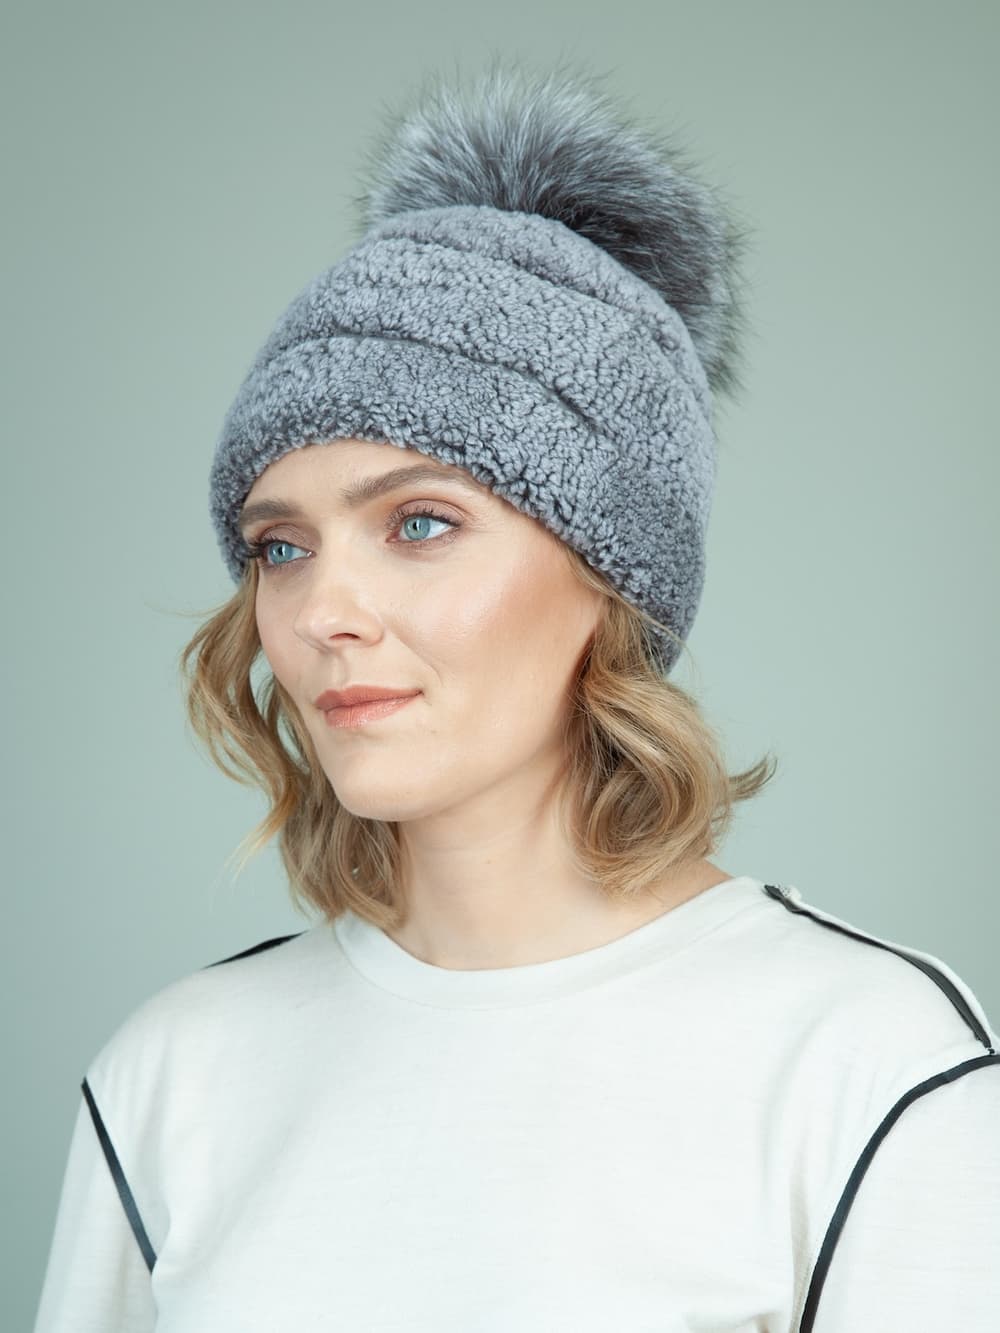 Accessories Hats & Caps Winter Hats Rex Rabbit Fur Hat With Leather Inserts And Big Fox Fur Pom-Pom for Women 